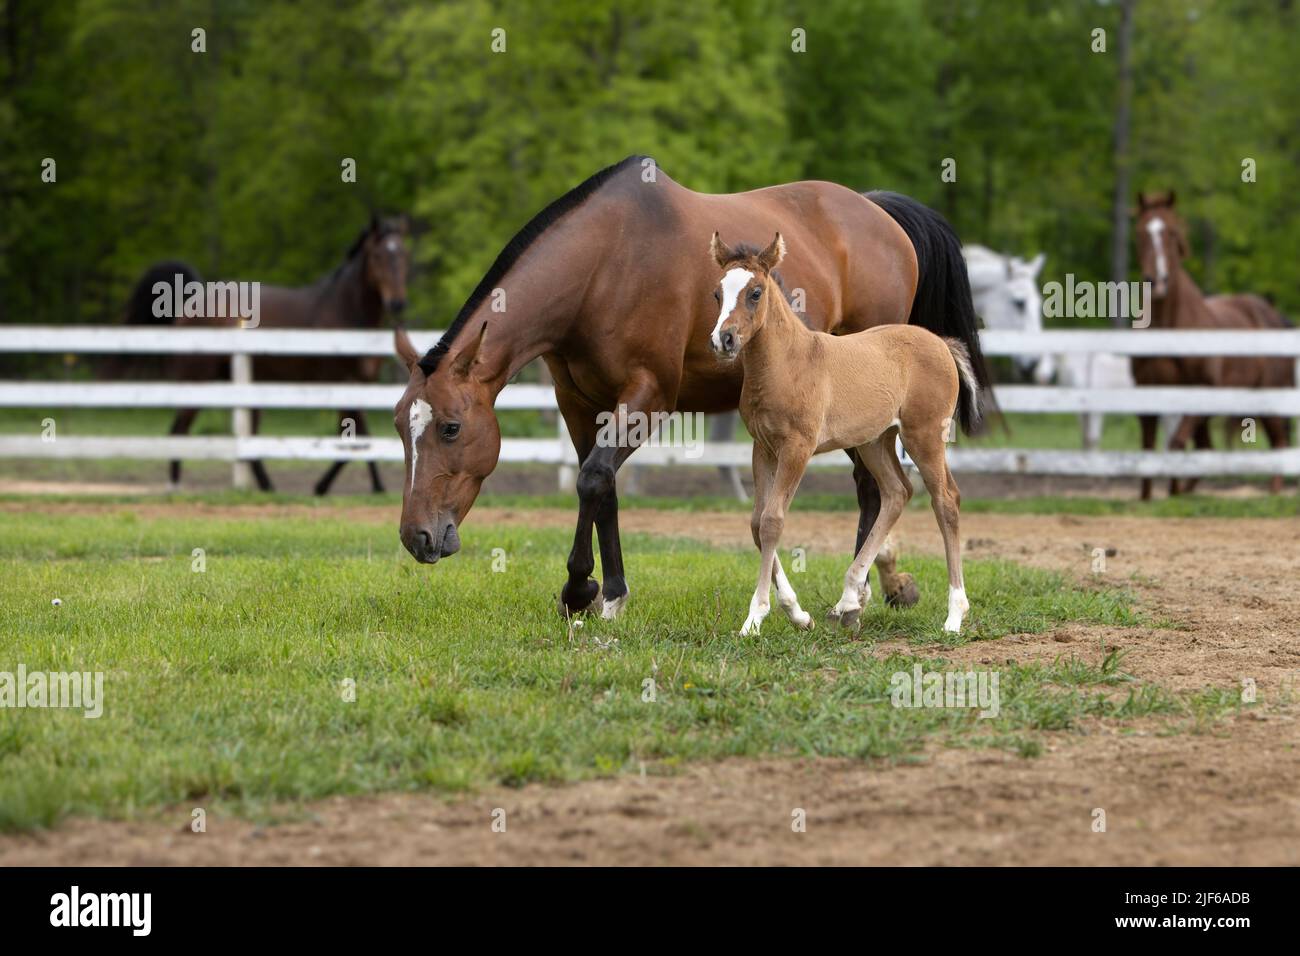 A foal horse walking next to her mother in a paddock. Stock Photo